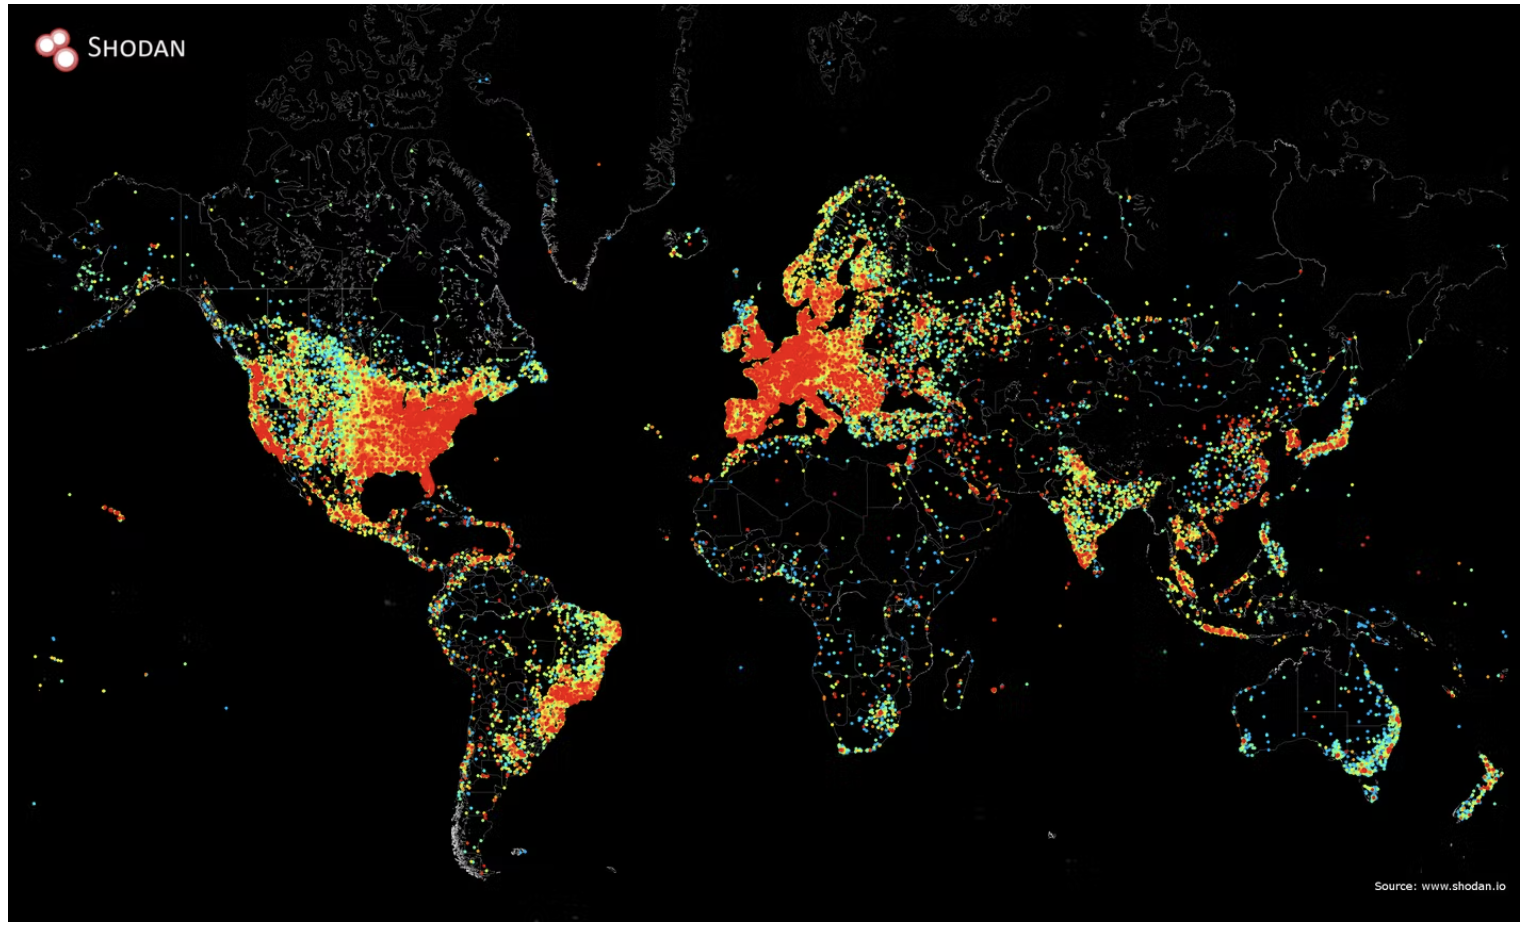 A map of the worldwide internet connectivity in 2014